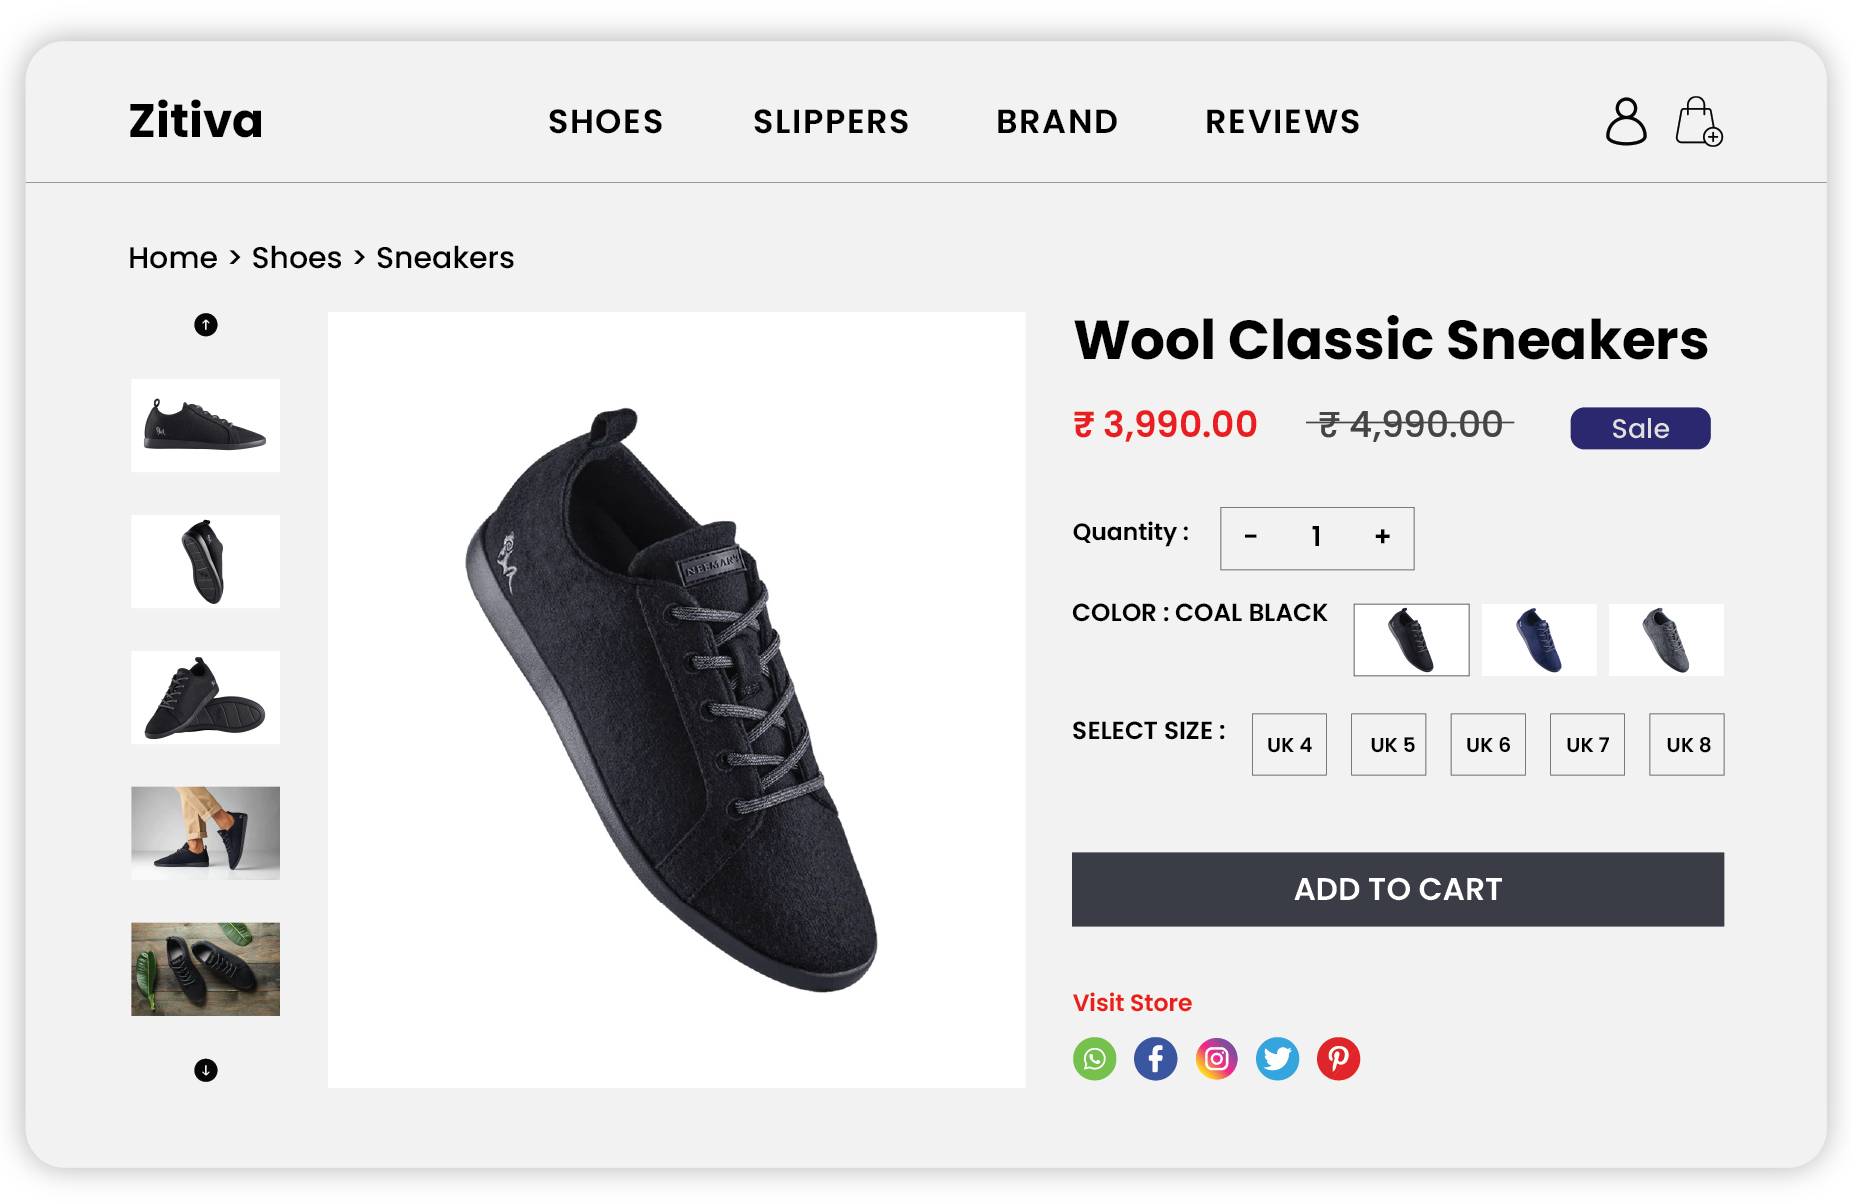  Step into Profit: How to Sell Shoes Online Successfully